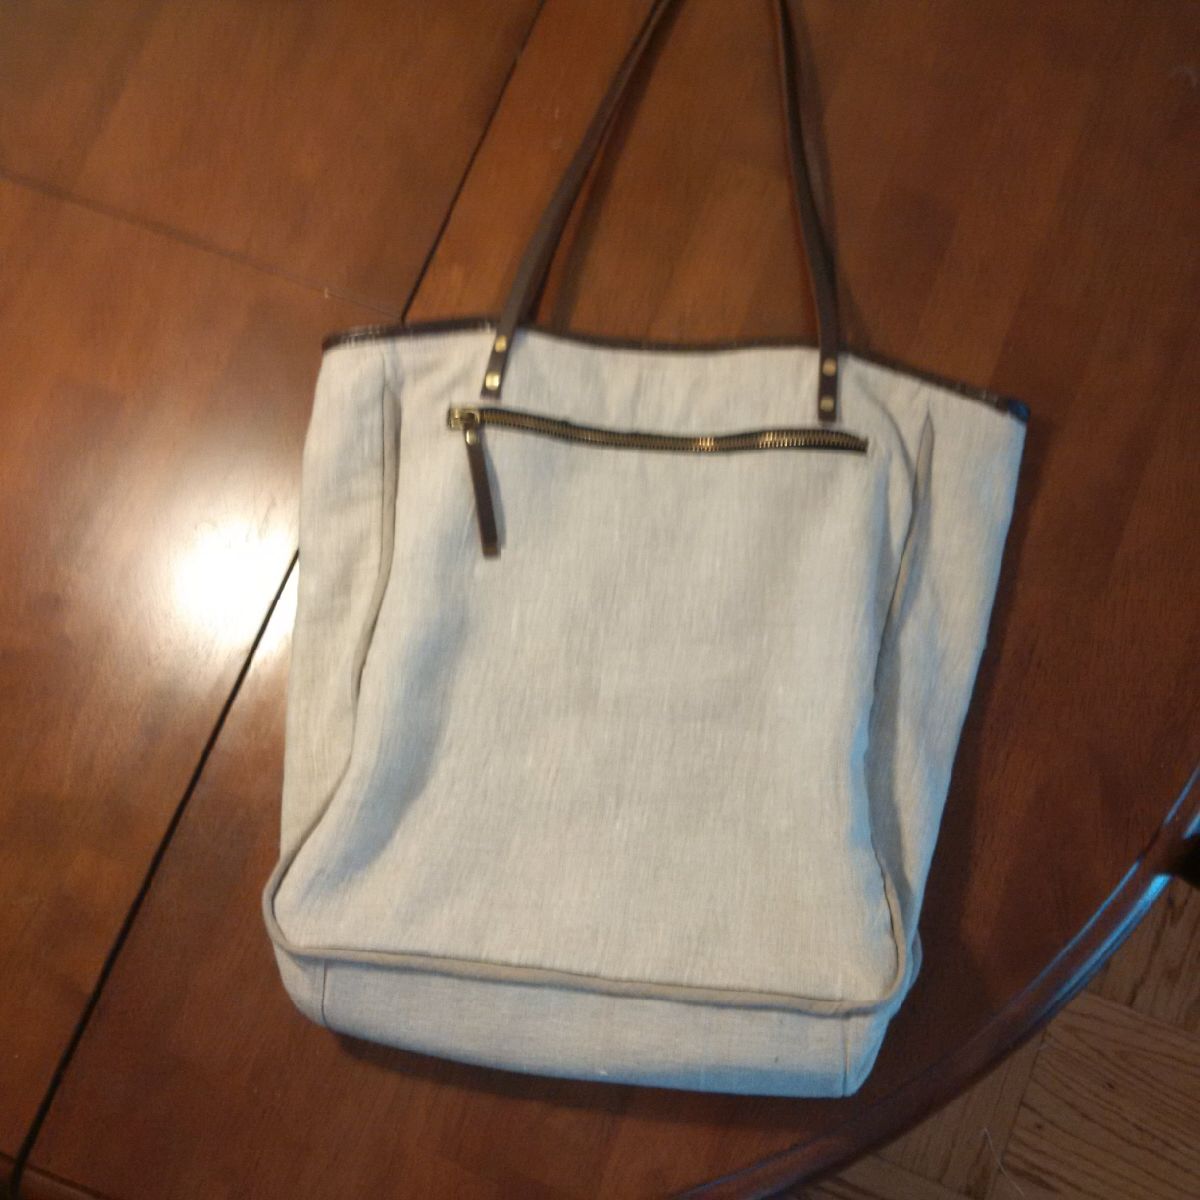 Ivy, I had a J.Crew tote bag made of black cotton that got shabby but I loved the design. So I kept the f...